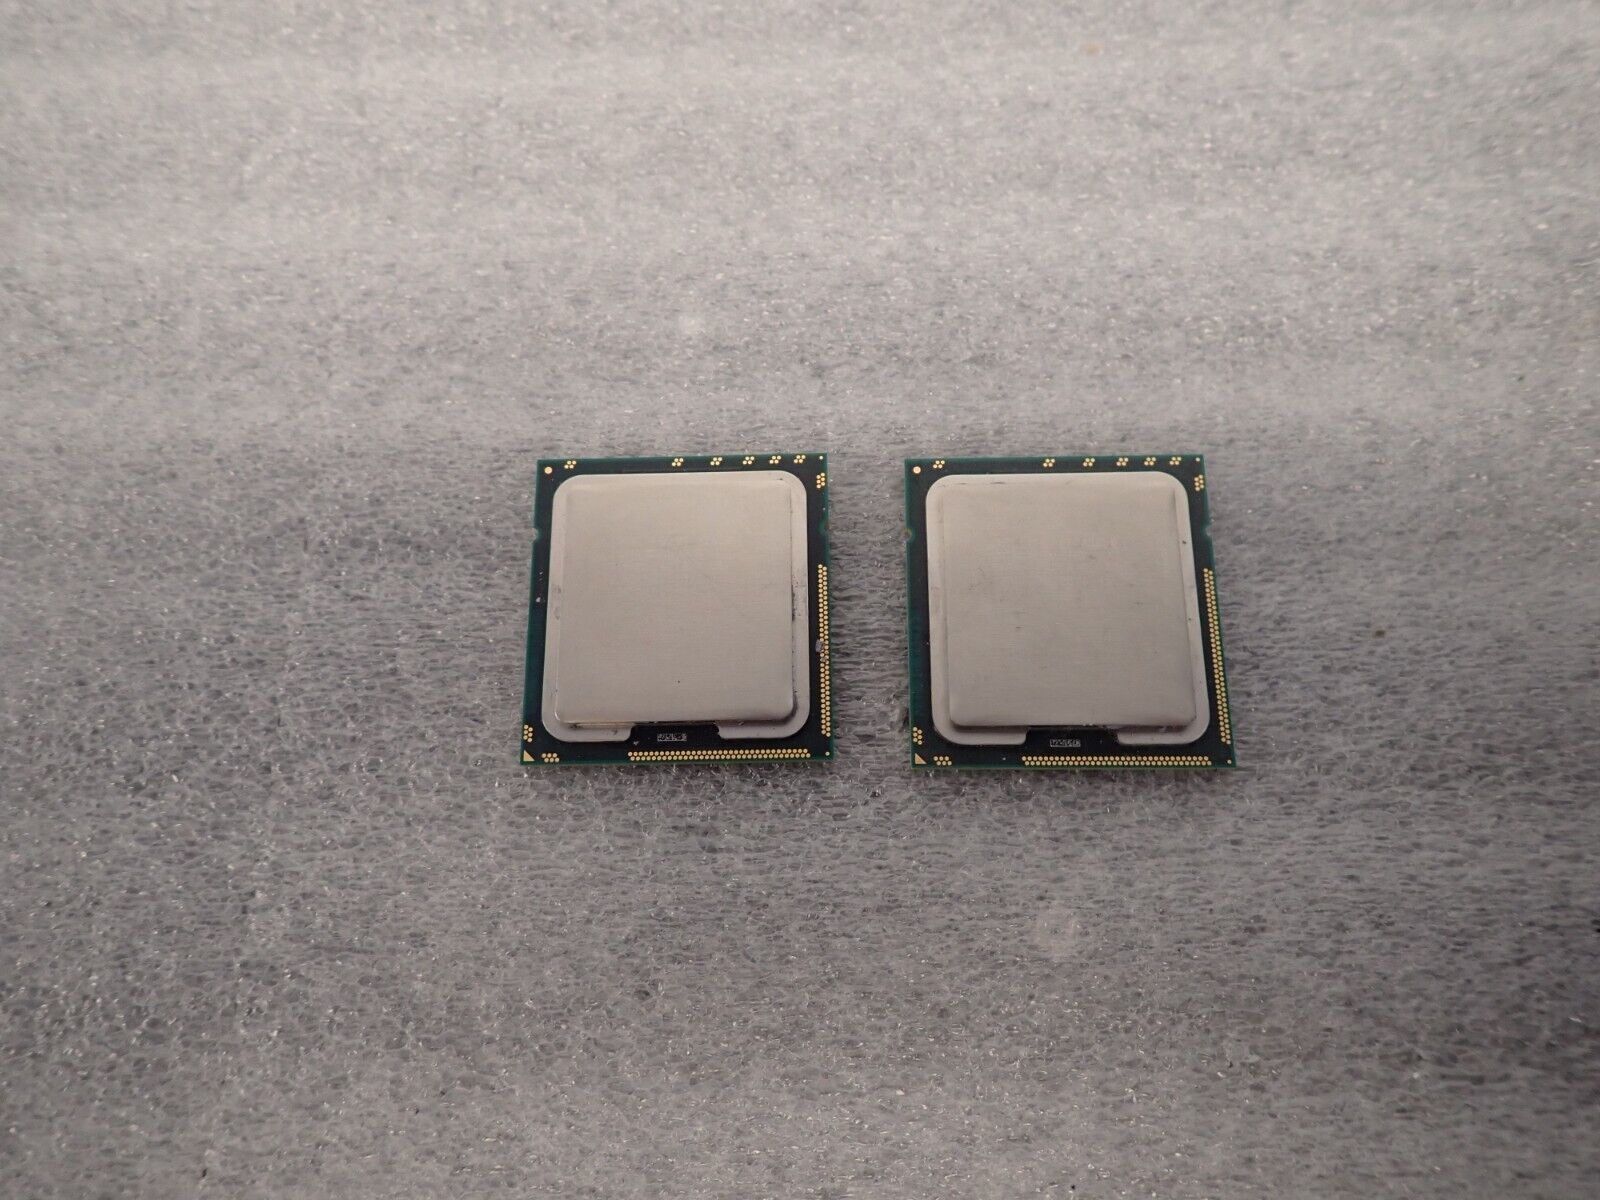 Matched Pair Intel Xeon X5650 2.66GHz Six Core CPUs SLBV3